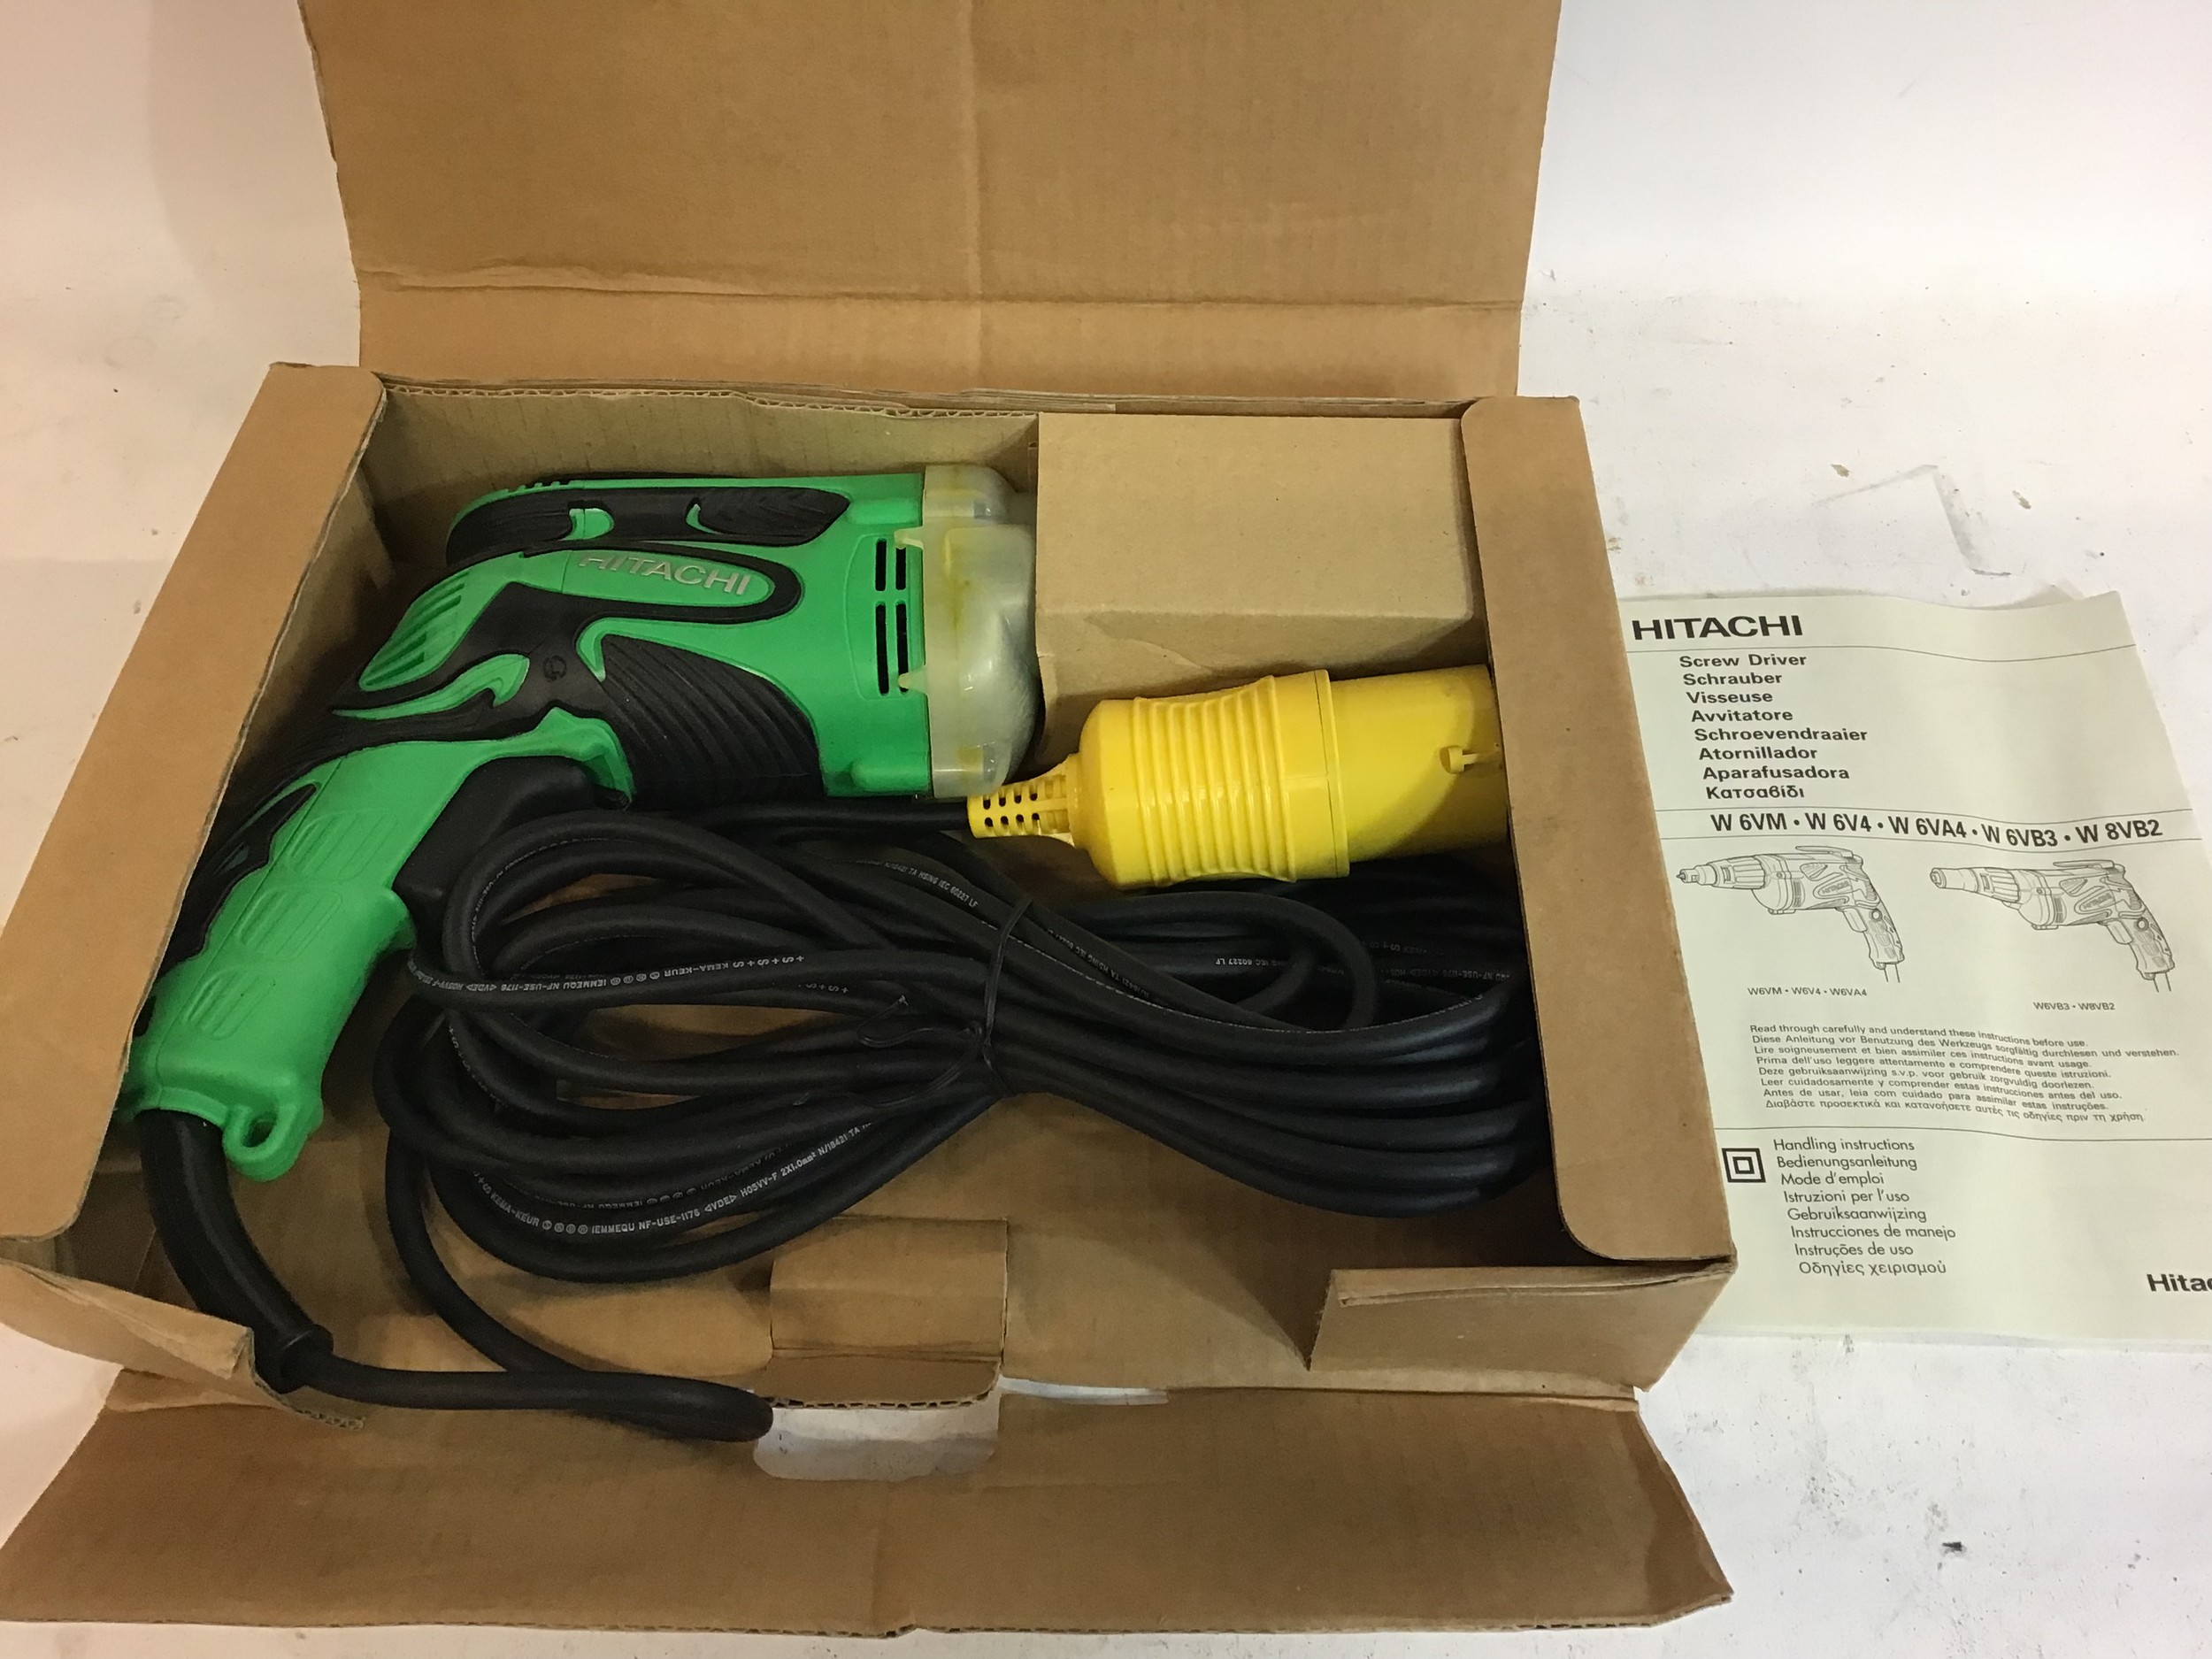 Hitachi W8VB2 professional electric screw driver found here in original box with instruction book.